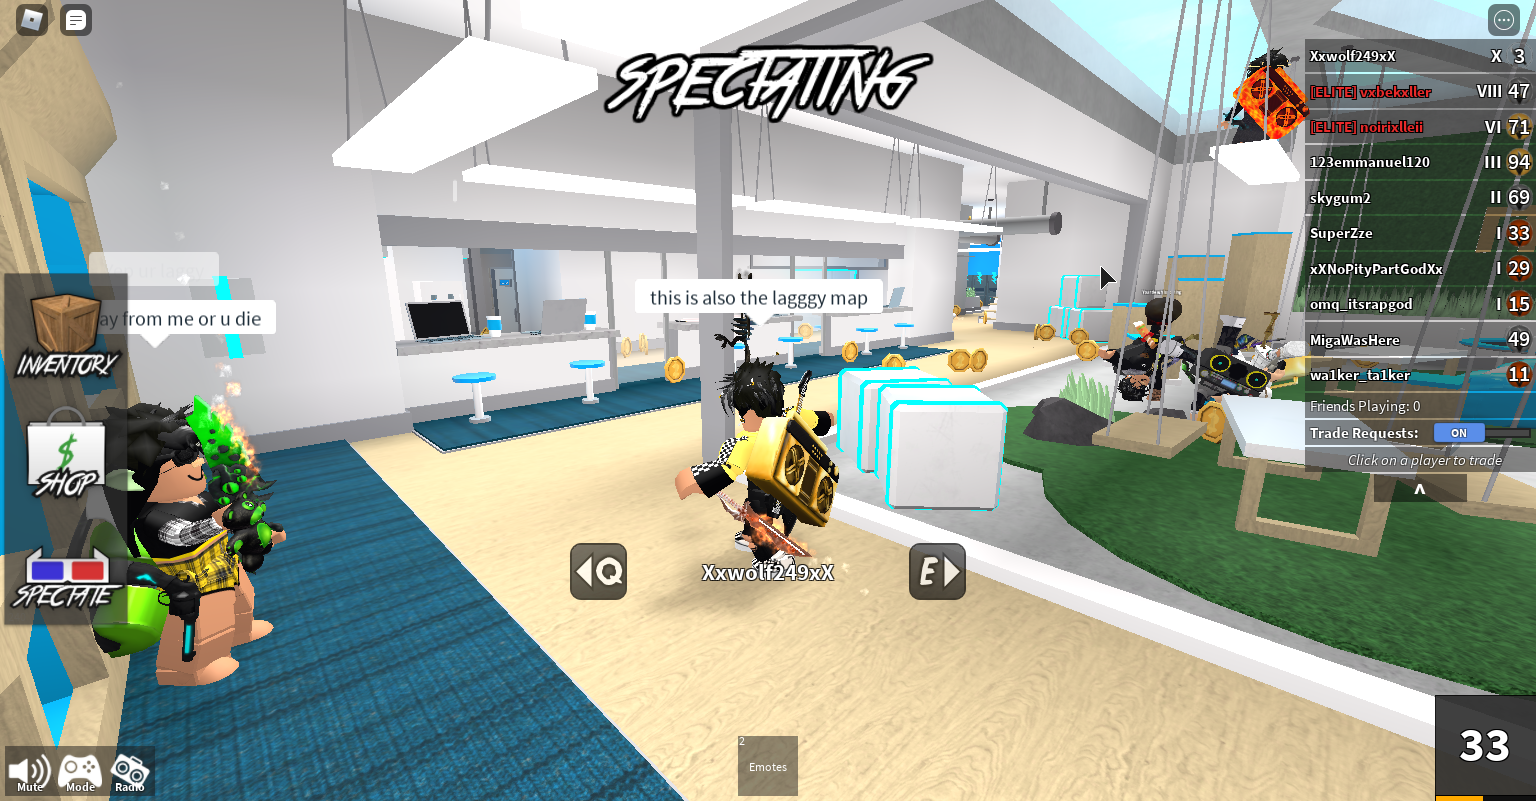 Why do all these things exist in Roblox: Teamers, OD (online